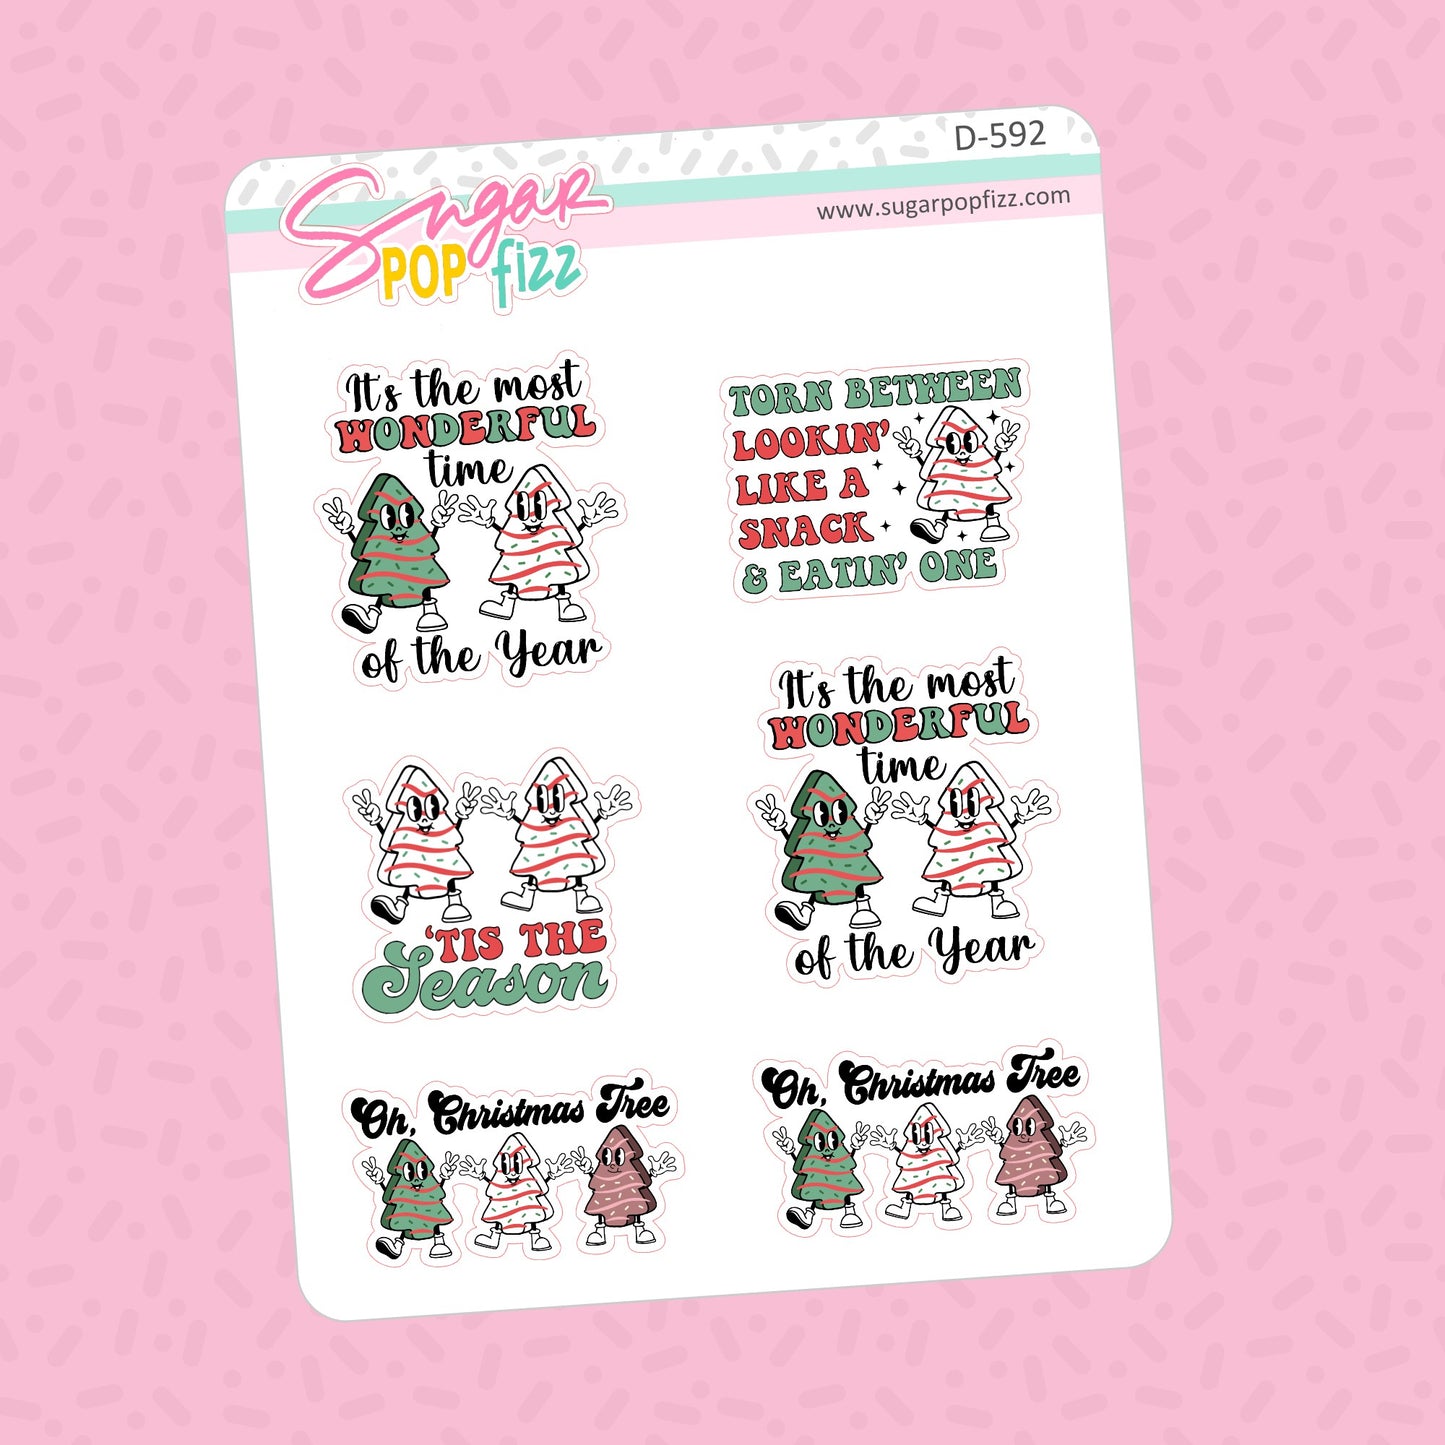 Christmas Tree Cake Quotes Doodle Stickers - D592